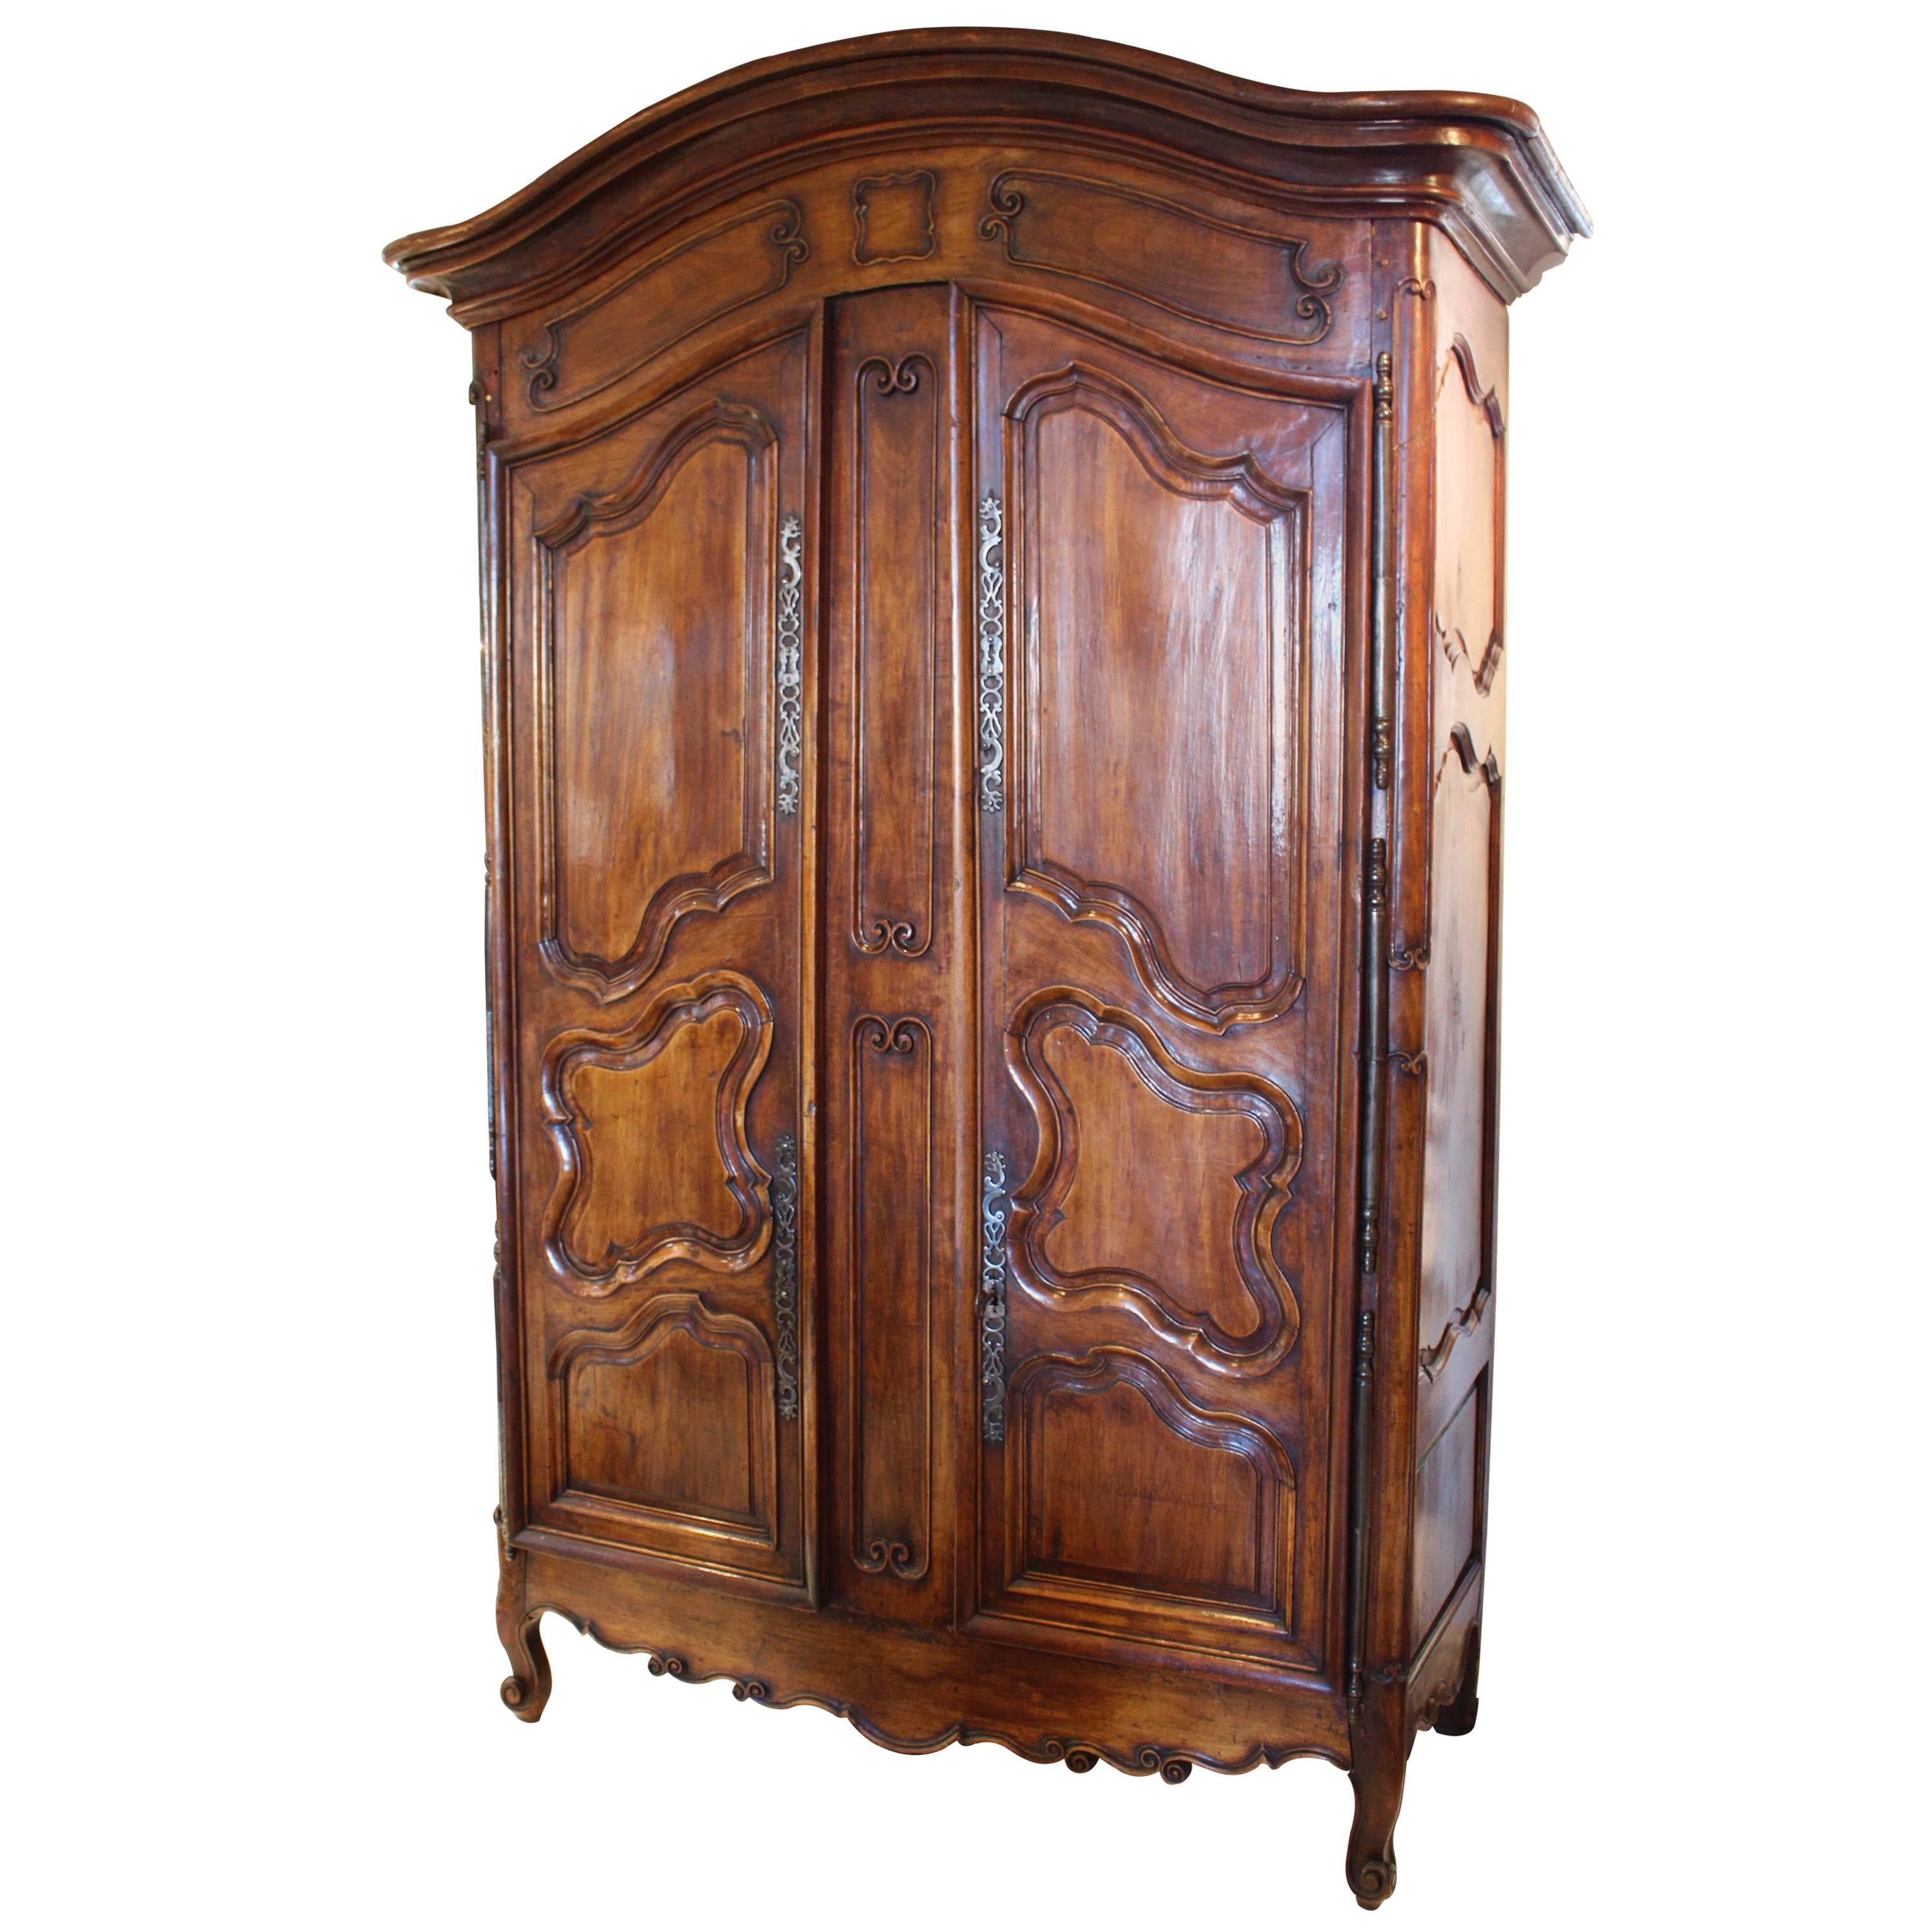 French 1740s Louis XV Period Fruitwood Two-Door Armoire with Raised Panels